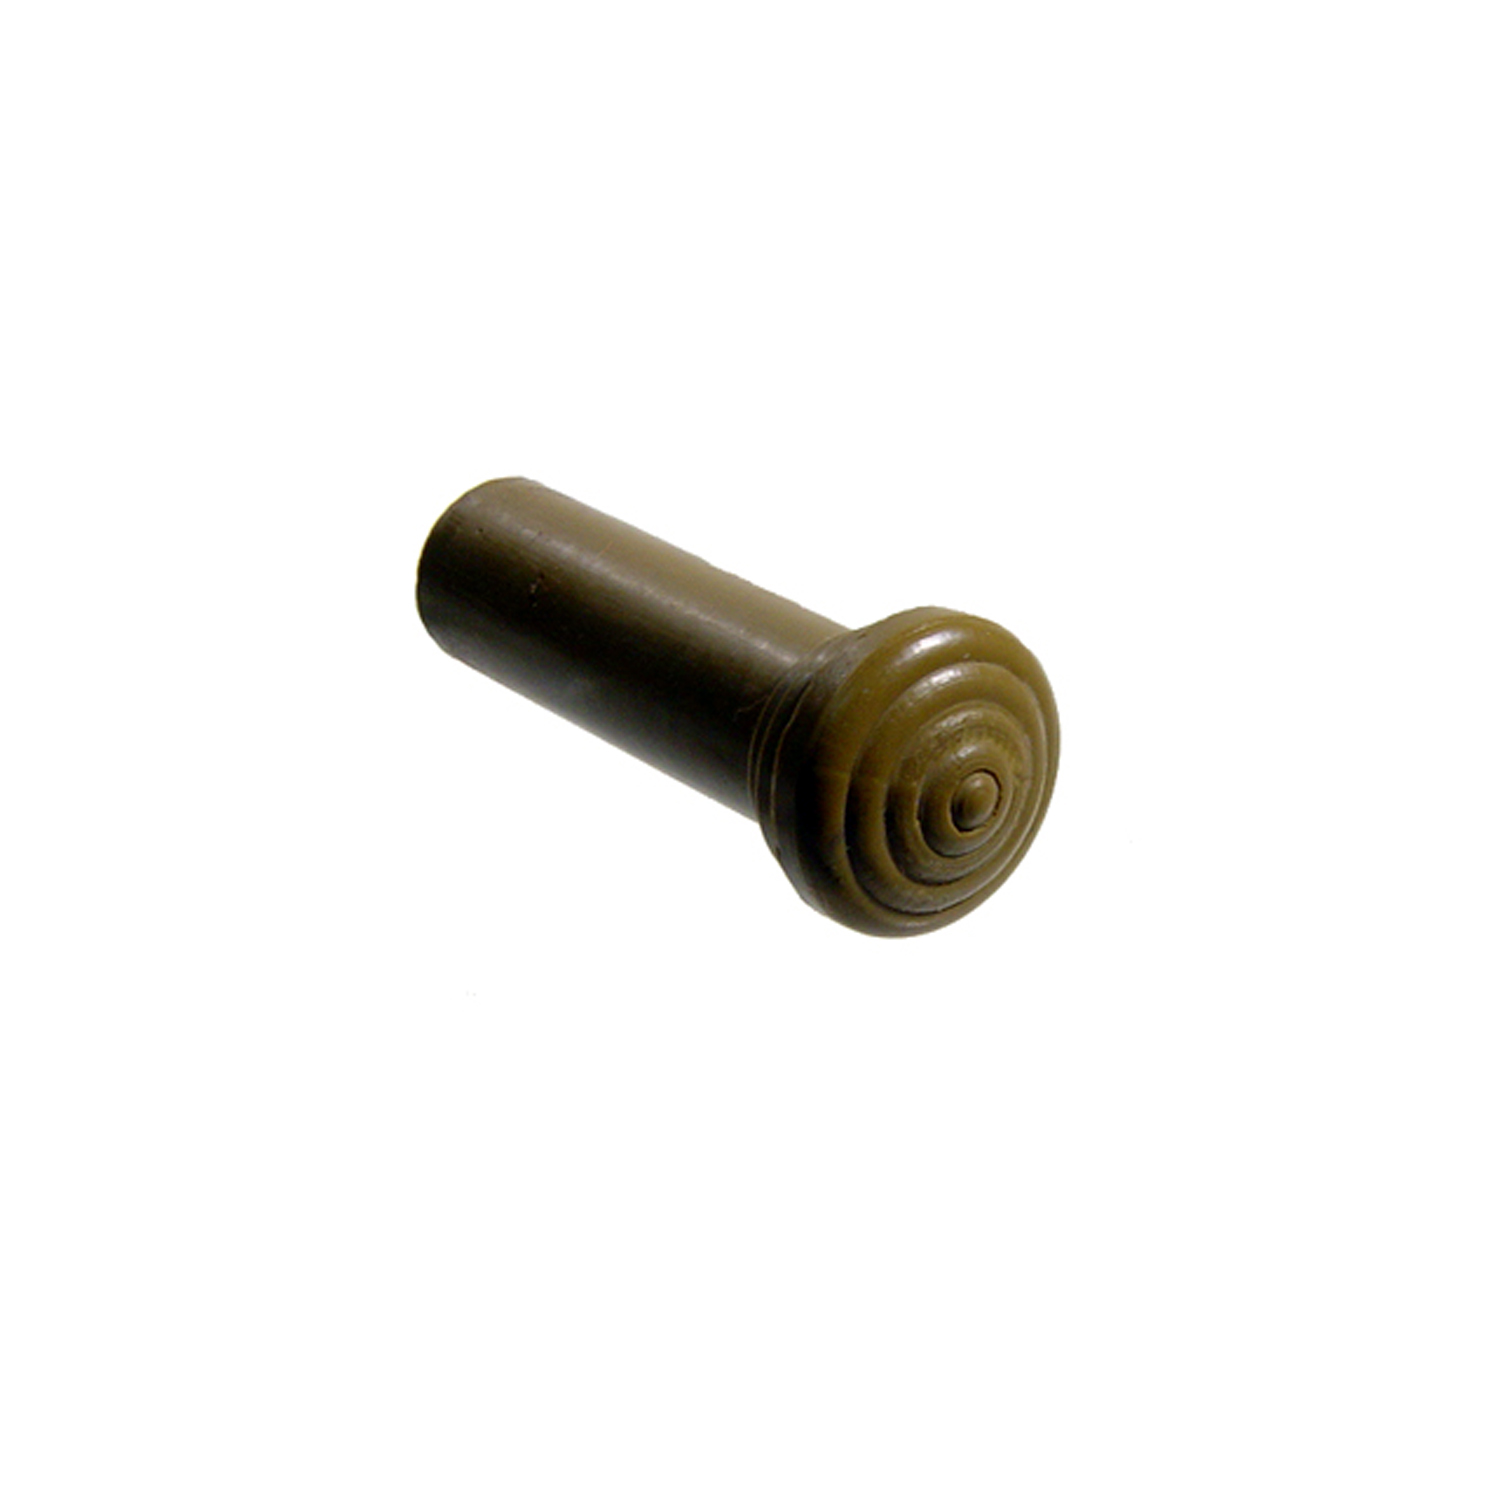 1959 Cadillac DeVille Door Lock Knob.  Made of Olive Green rubber, self-threading-RP 304-G